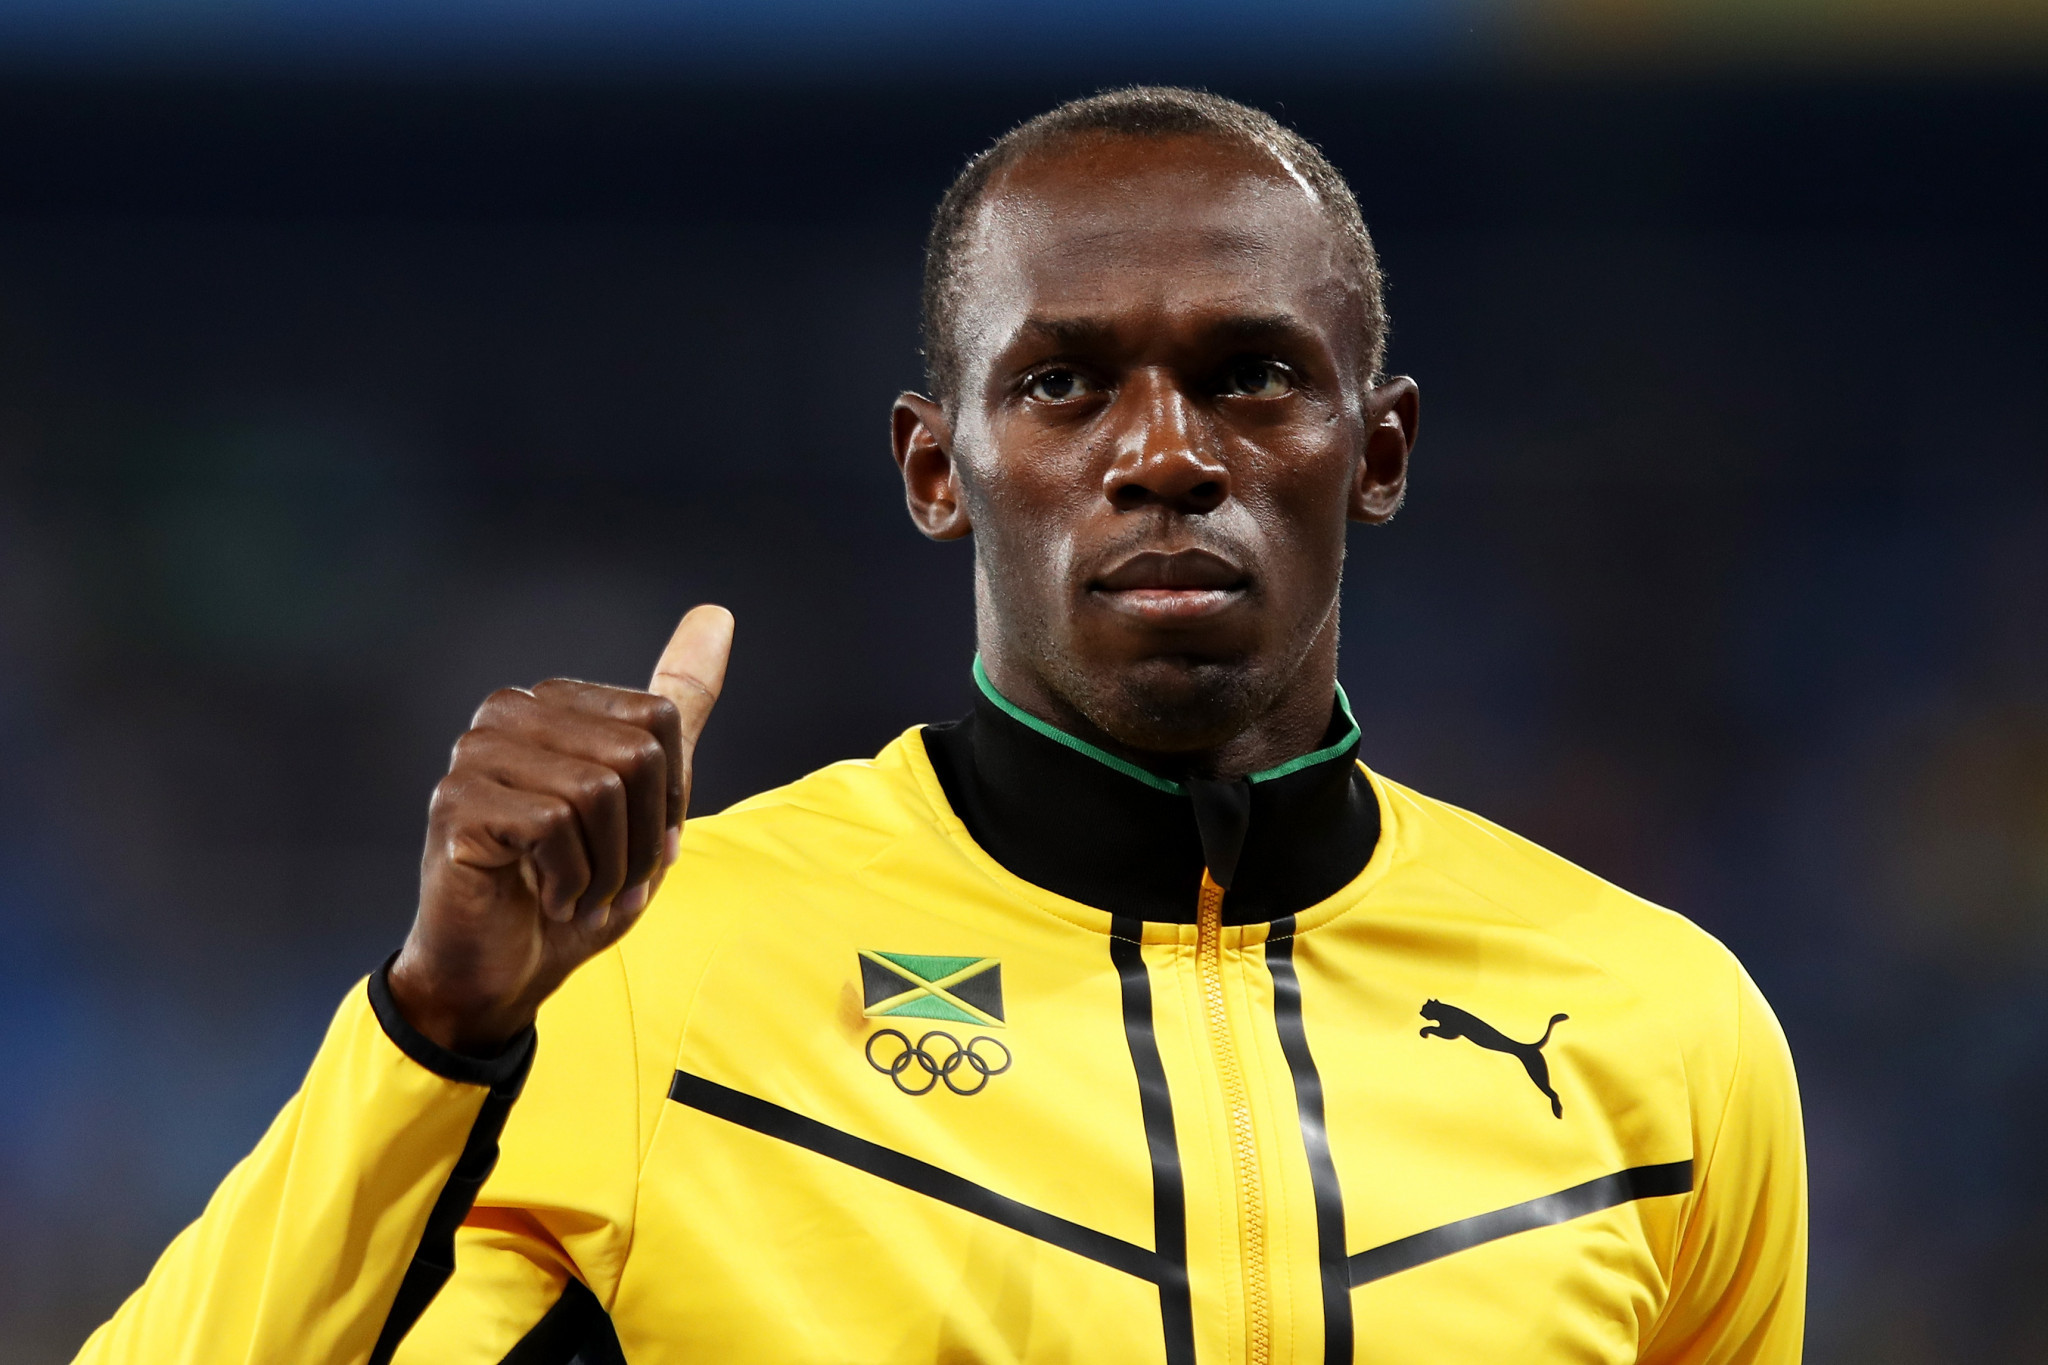 Usain Bolt won three of Jamaica's Olympic gold medals at Rio 2016 ©Getty Images